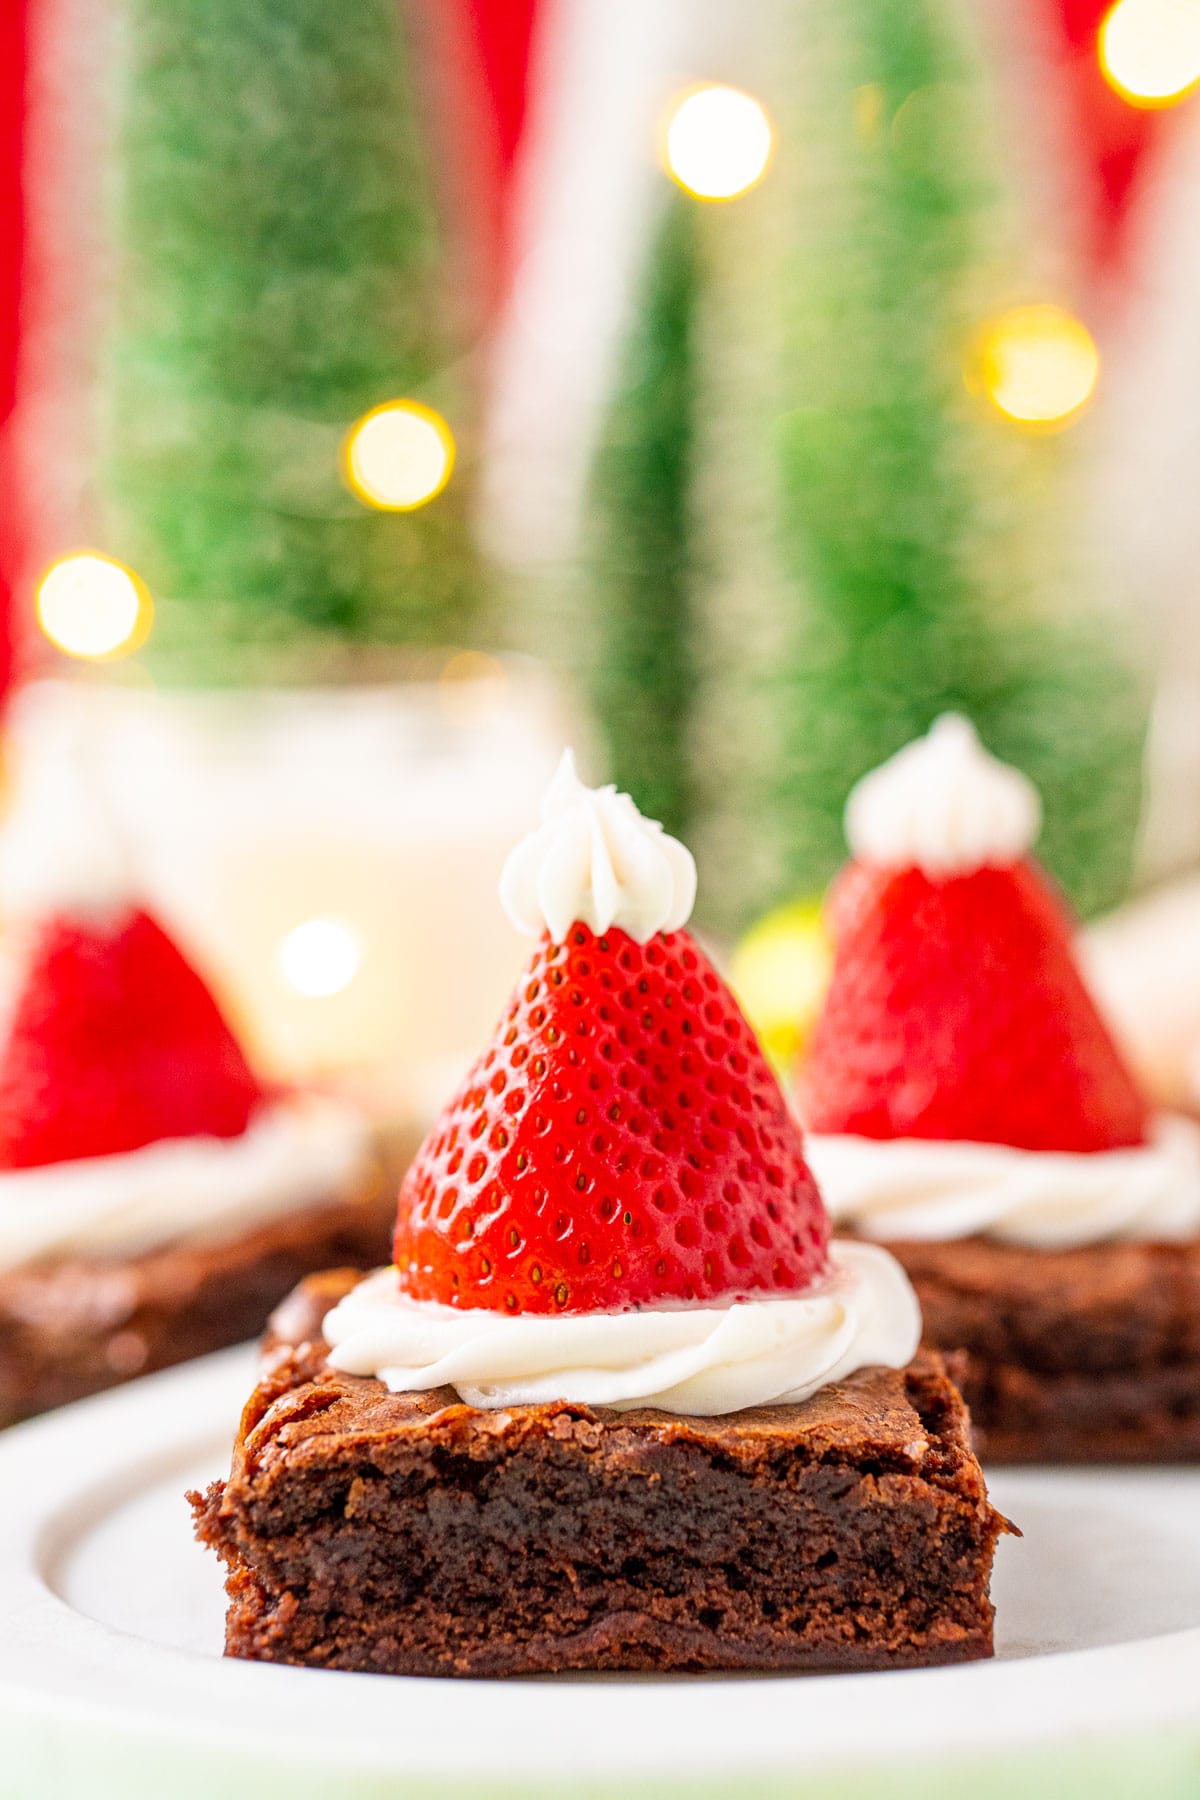 These Santa Hat Brownies are a simple and festive rich chocolate dessert the whole family will love! Perfect for parties and family get-togethers!